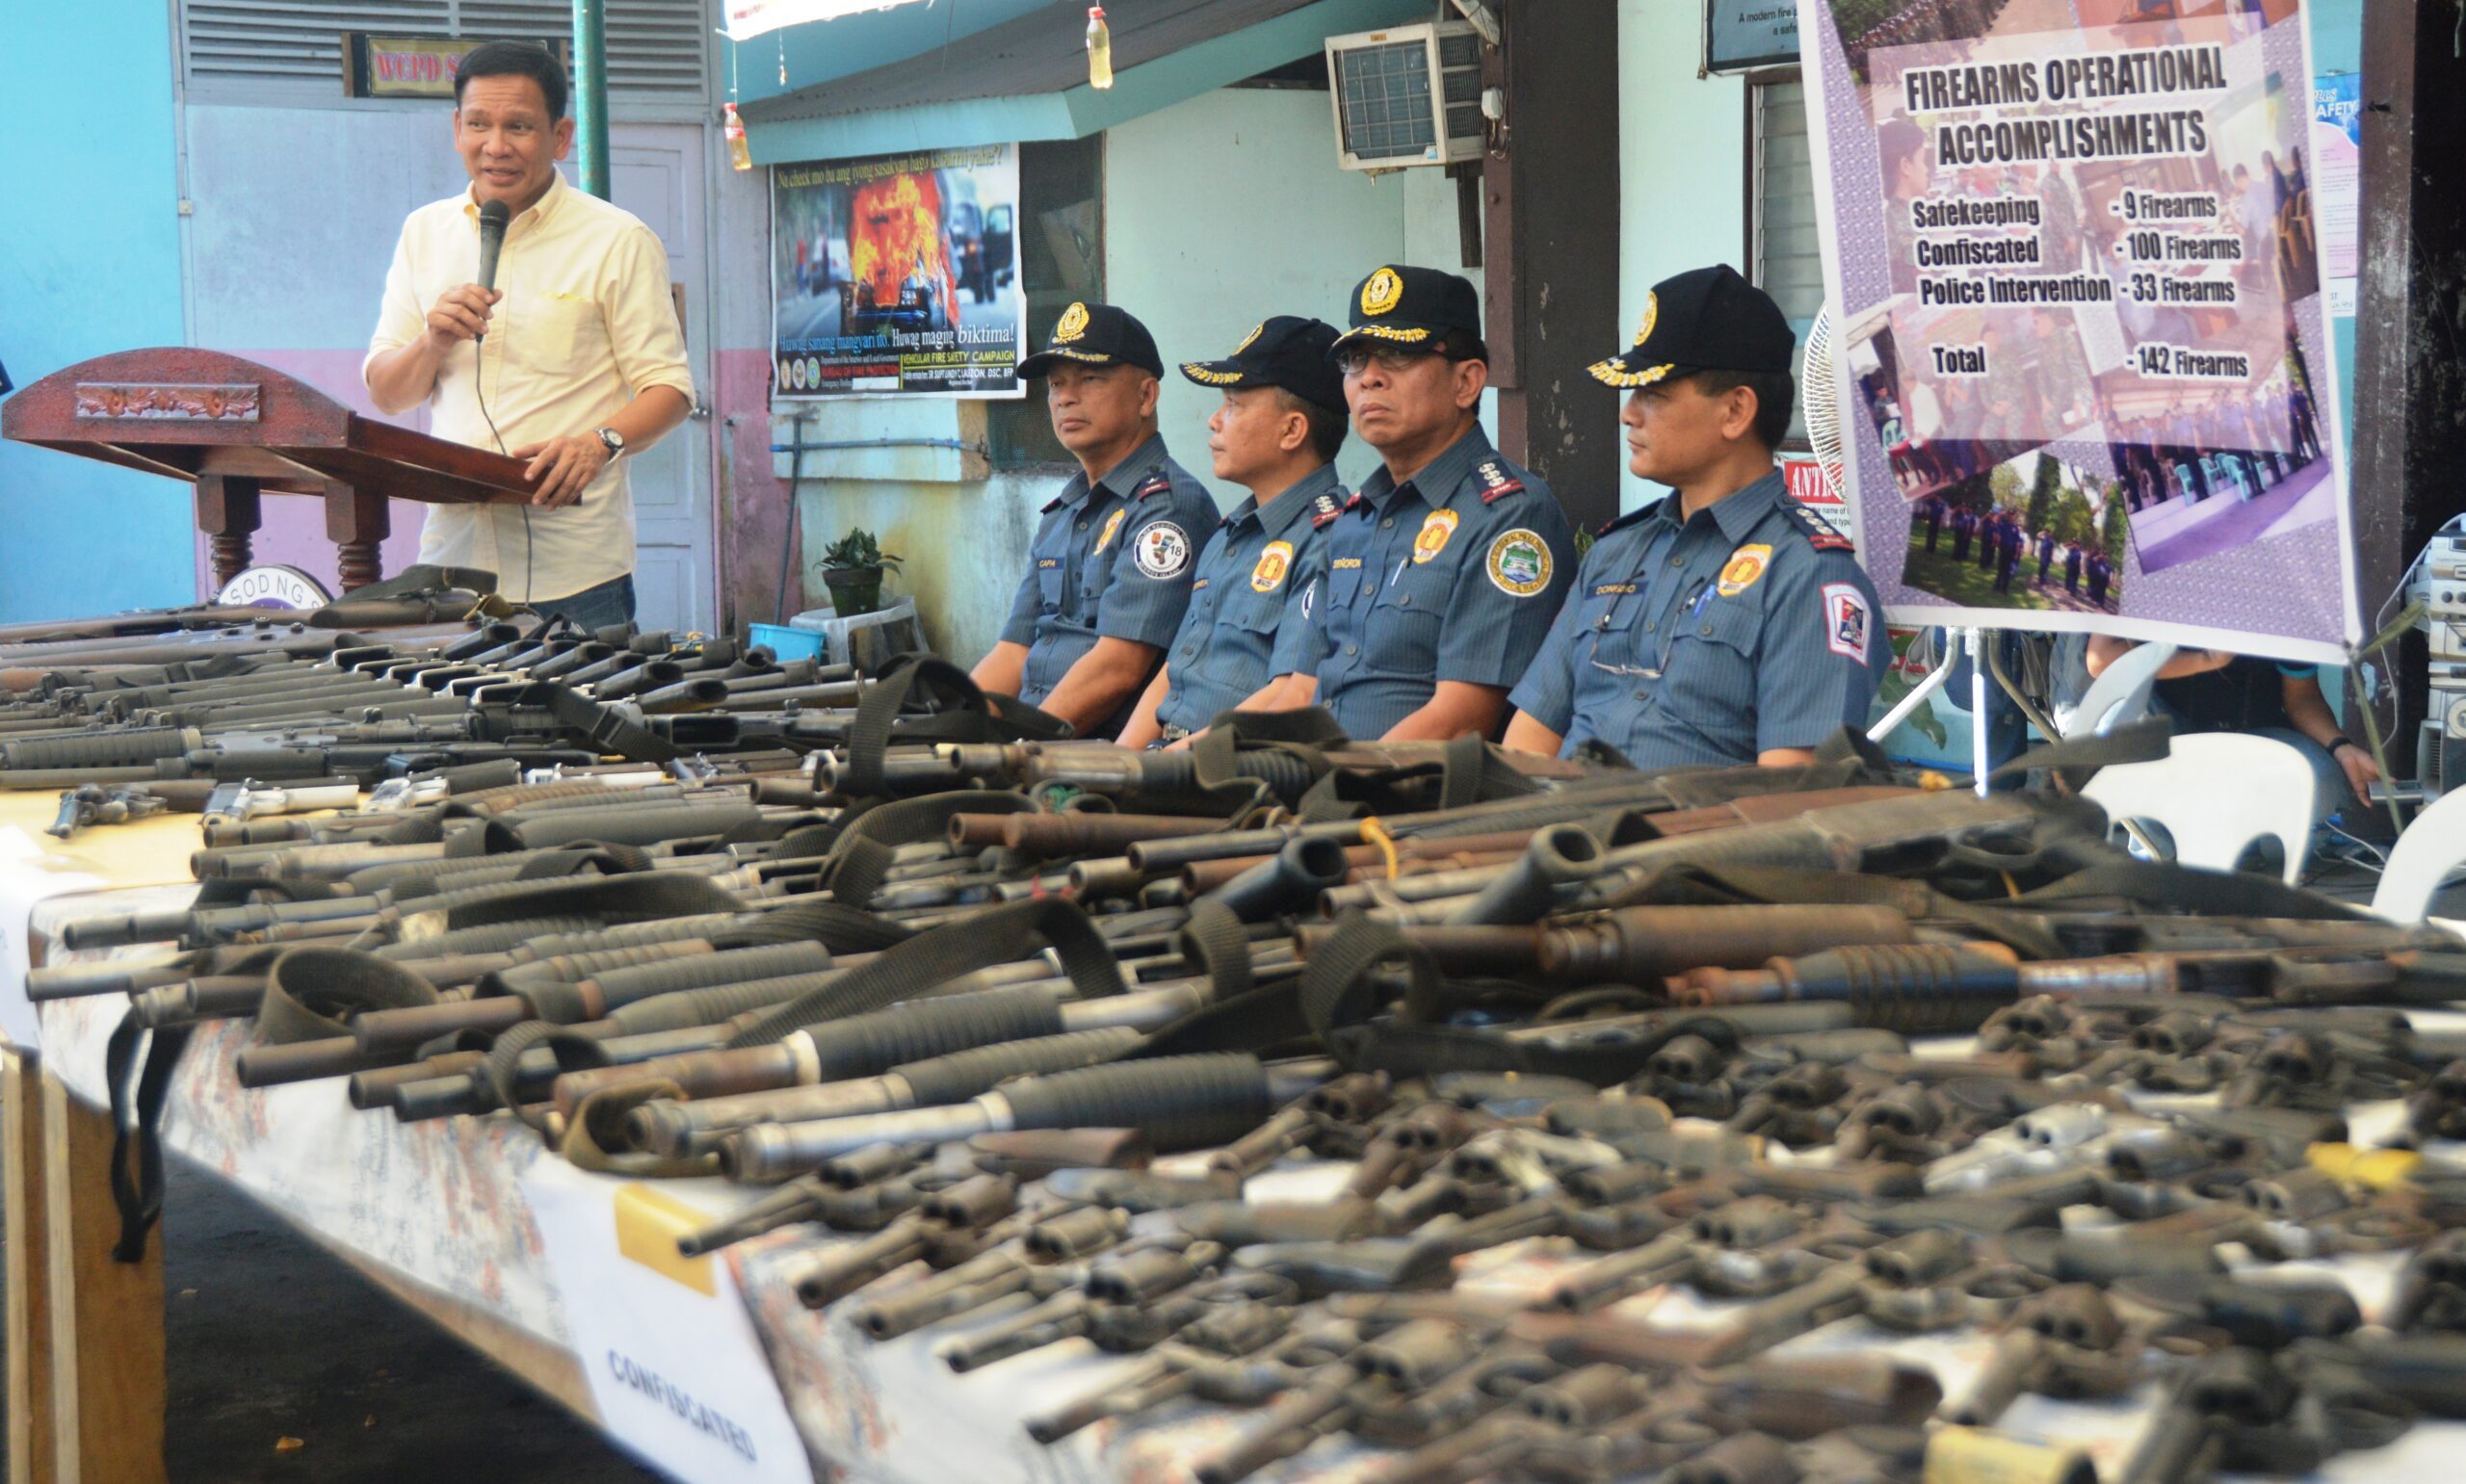 Negros police chief urges candidates to turn over firearms